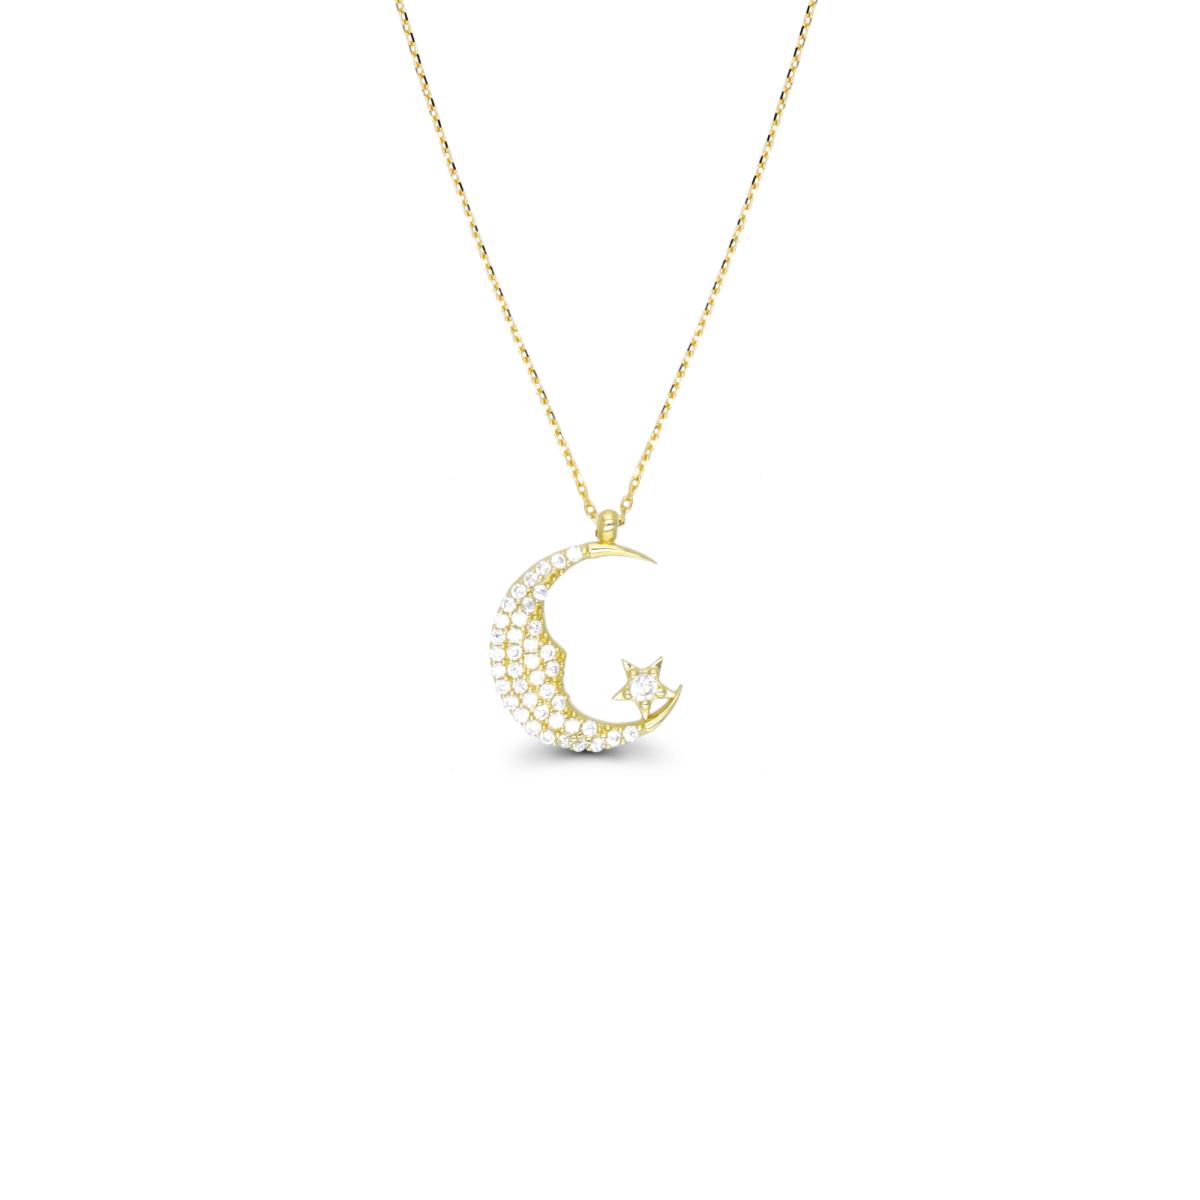 10K Yellow Gold Crescent Moon 16"+2" Necklace